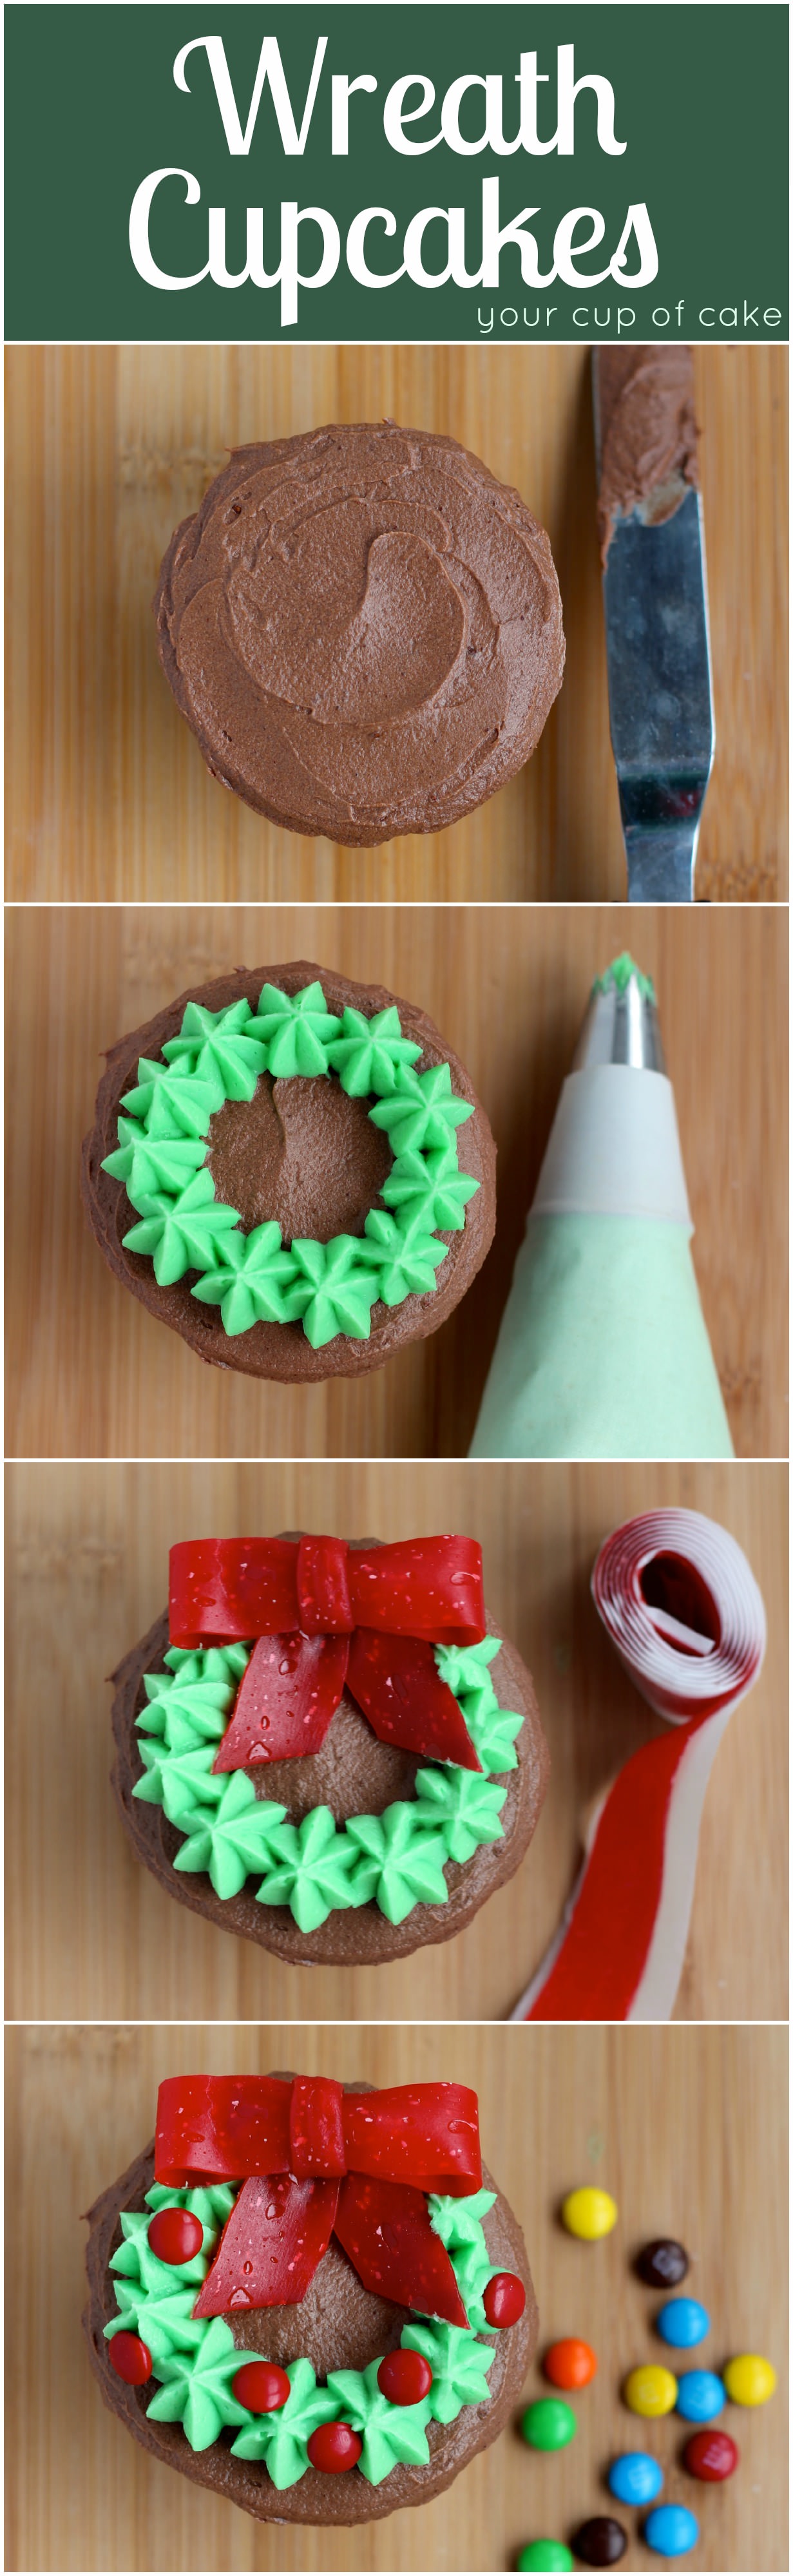 Easy Cupcake Decorating For Christmas Your Cup Of Cake